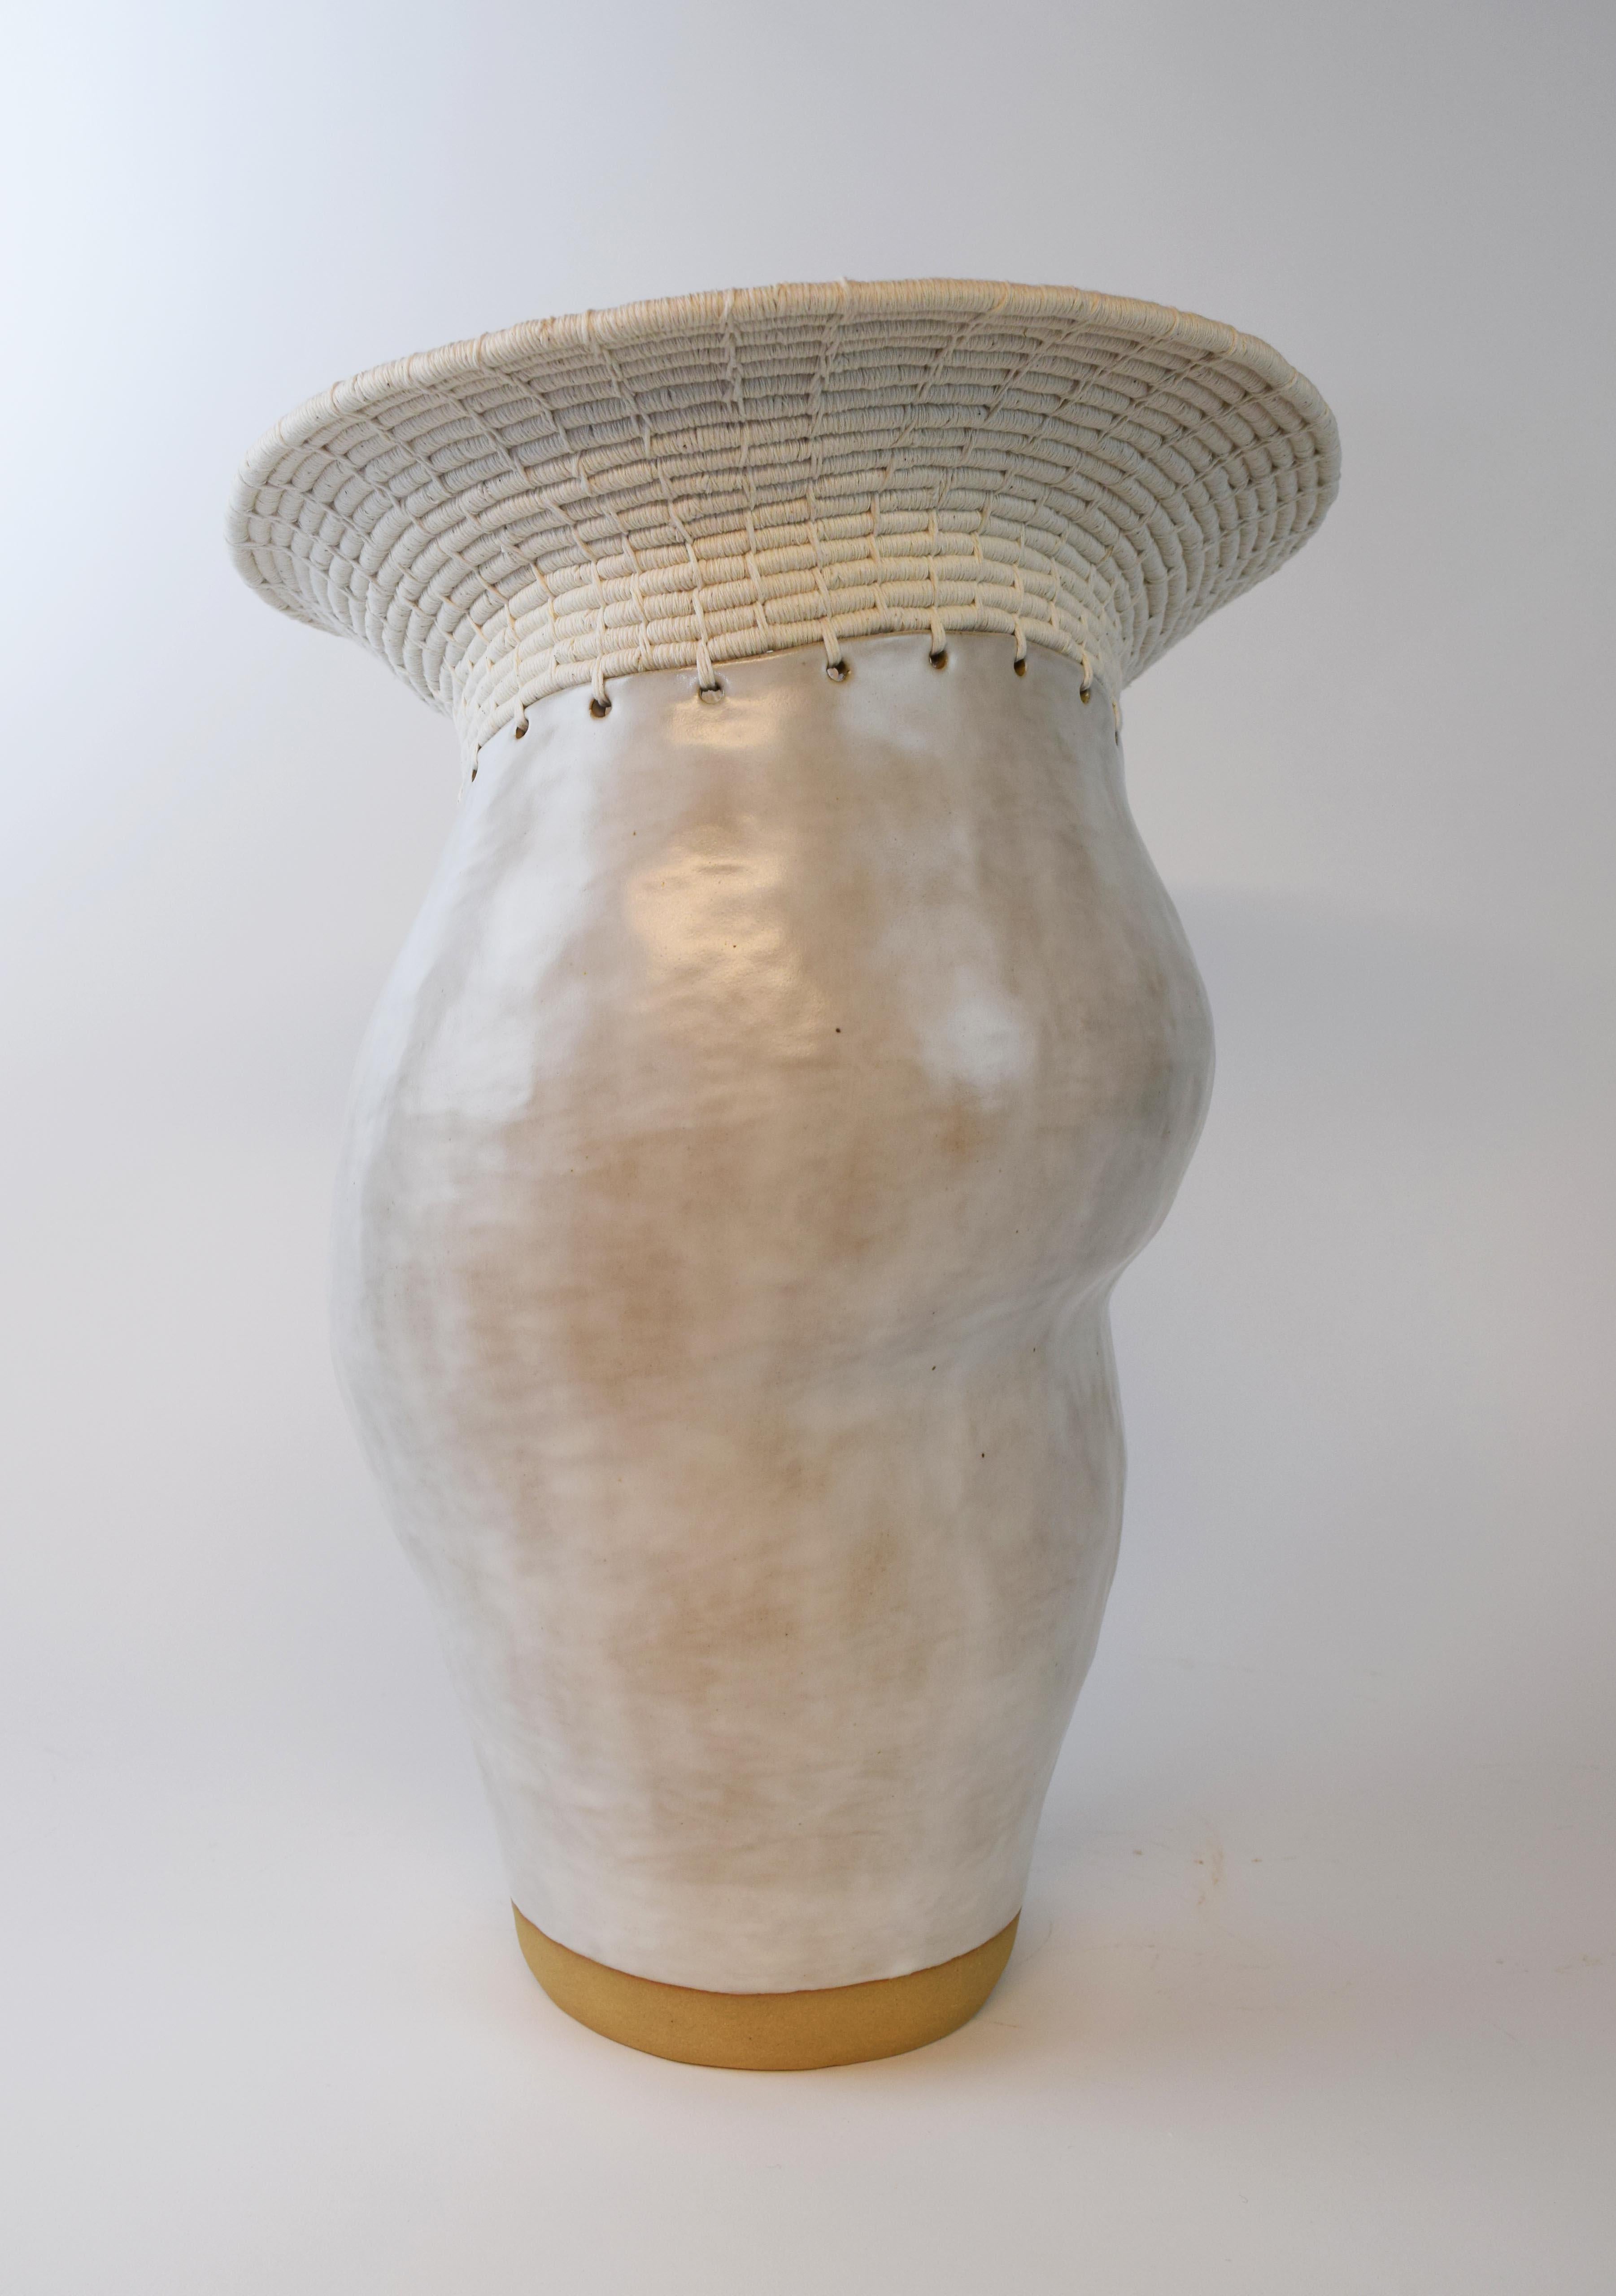 Organic Modern One of a Kind Asymmetrical Ceramic Vessel #771, White Glaze and Woven Cotton For Sale